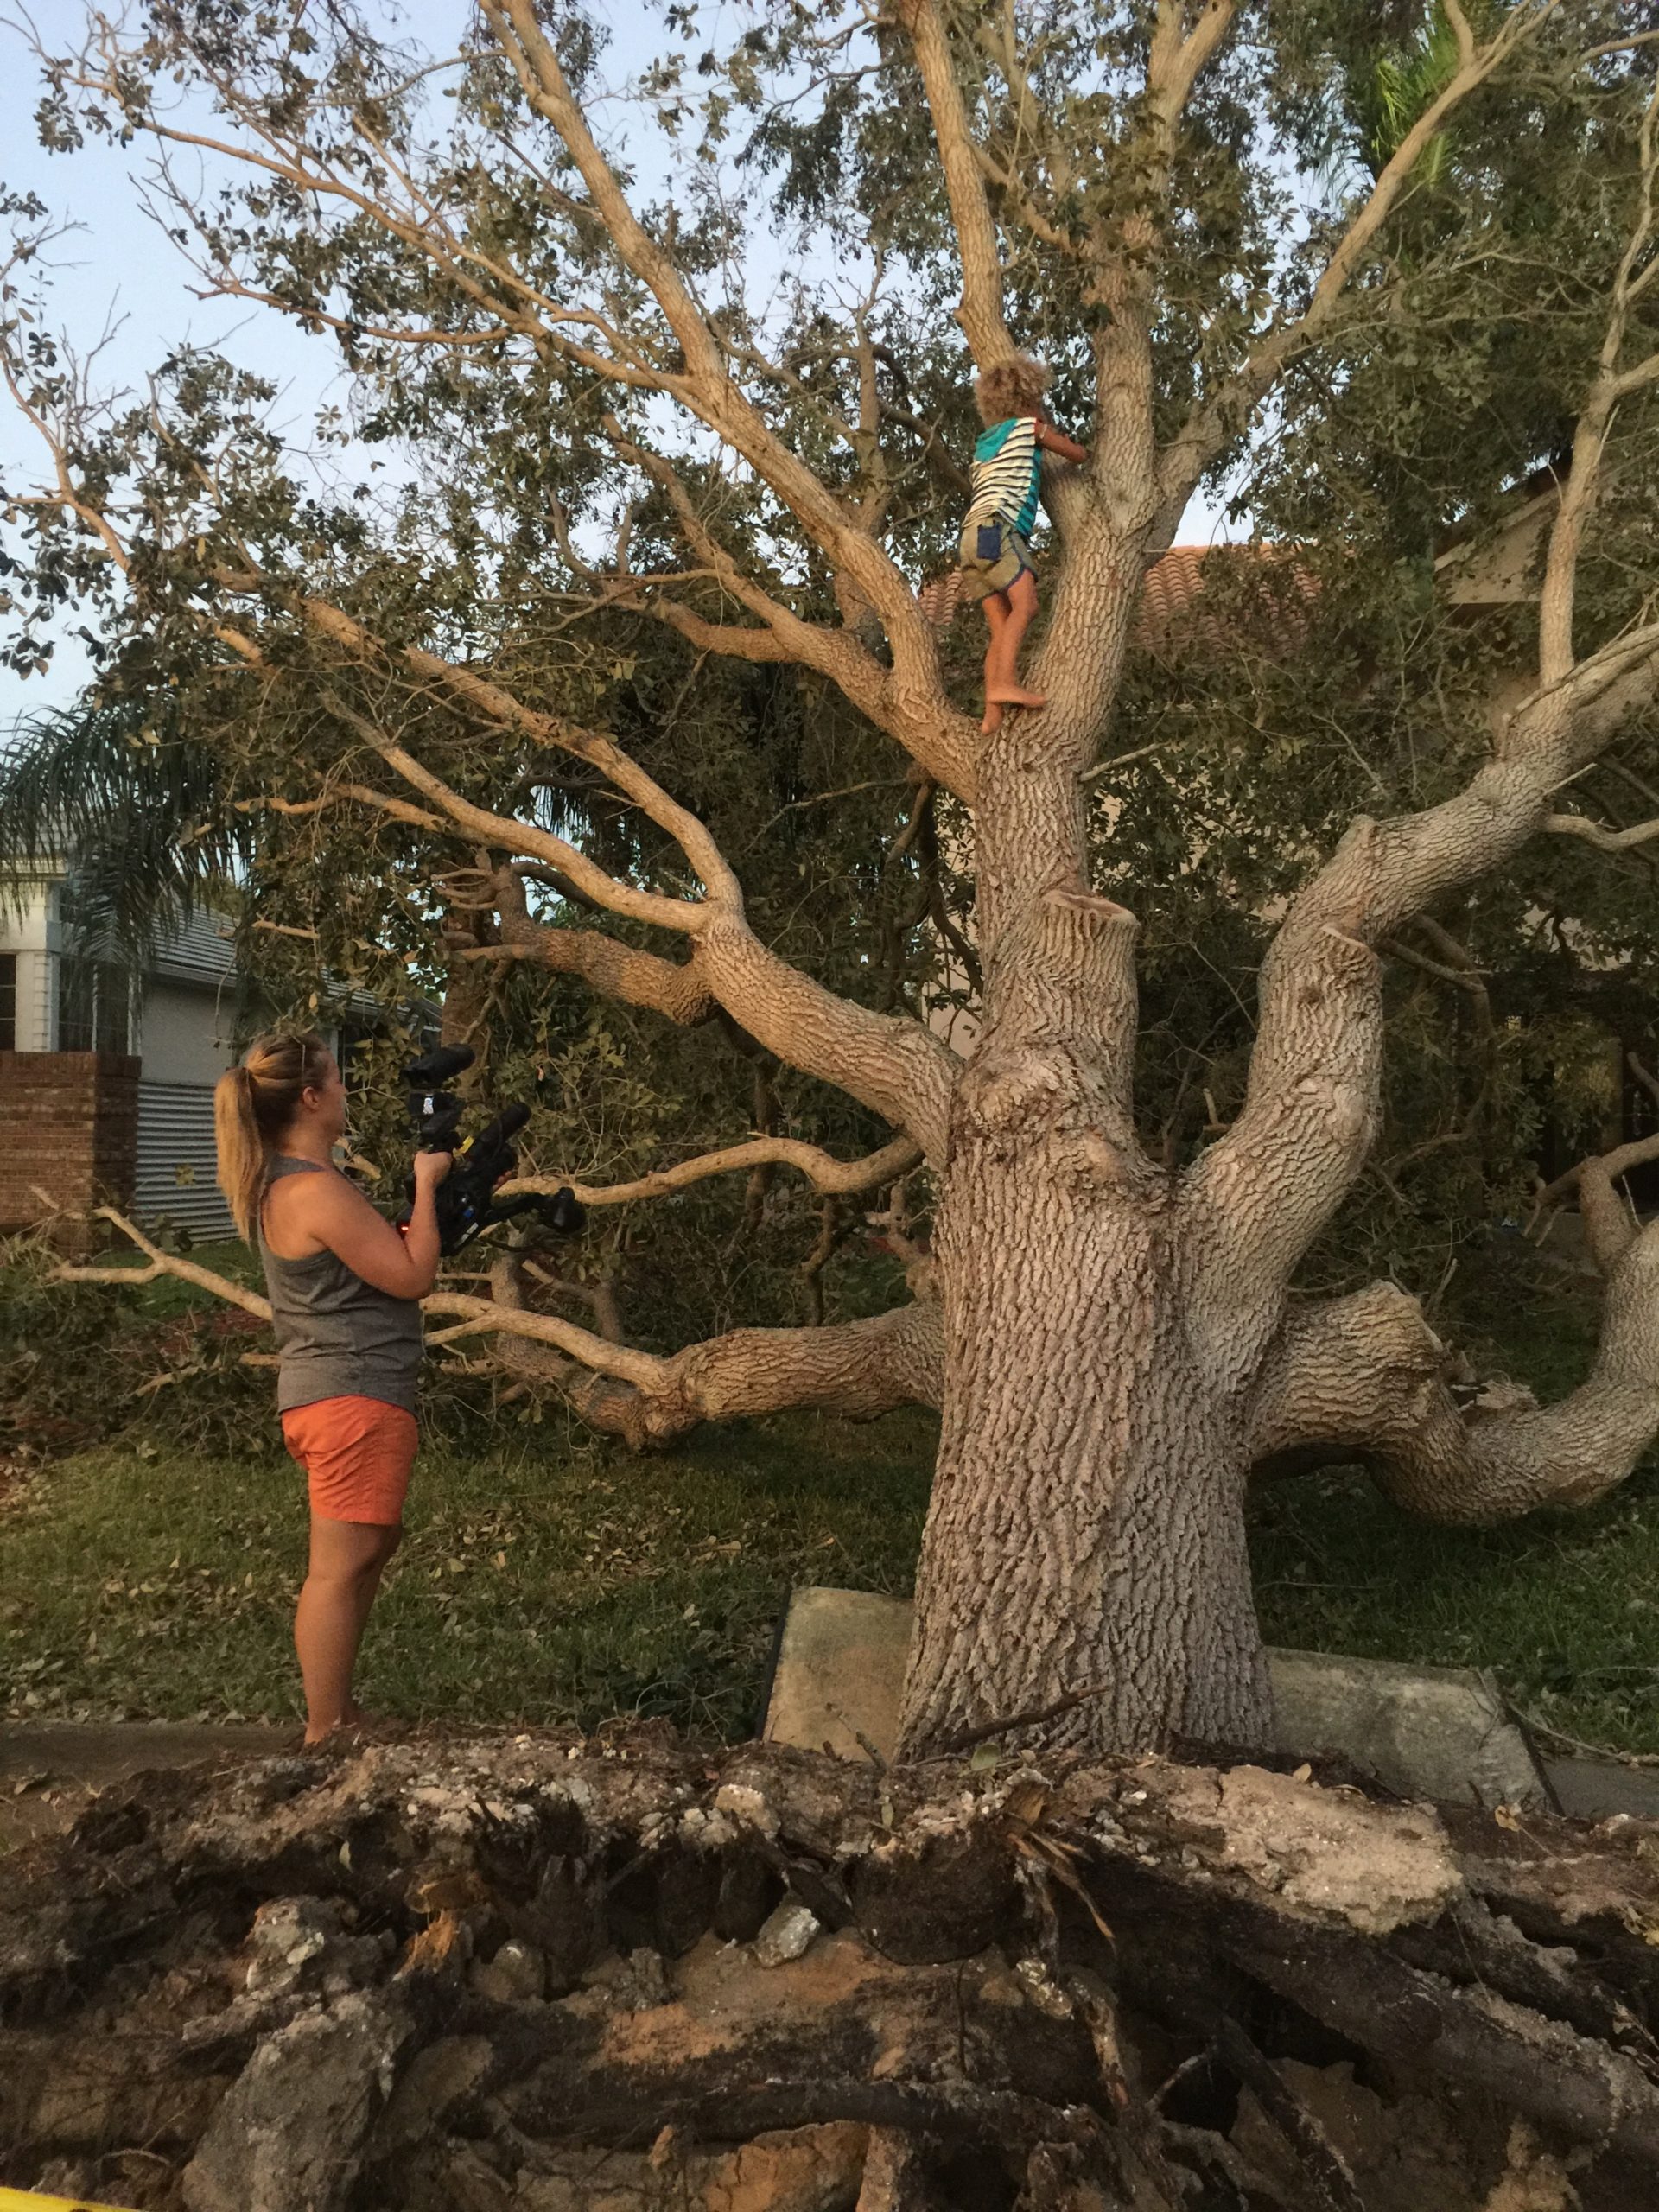 Christi Cooper filming Levi D., a plaintiff in the youth climate change case, in a tree near his Florida home after a storm.